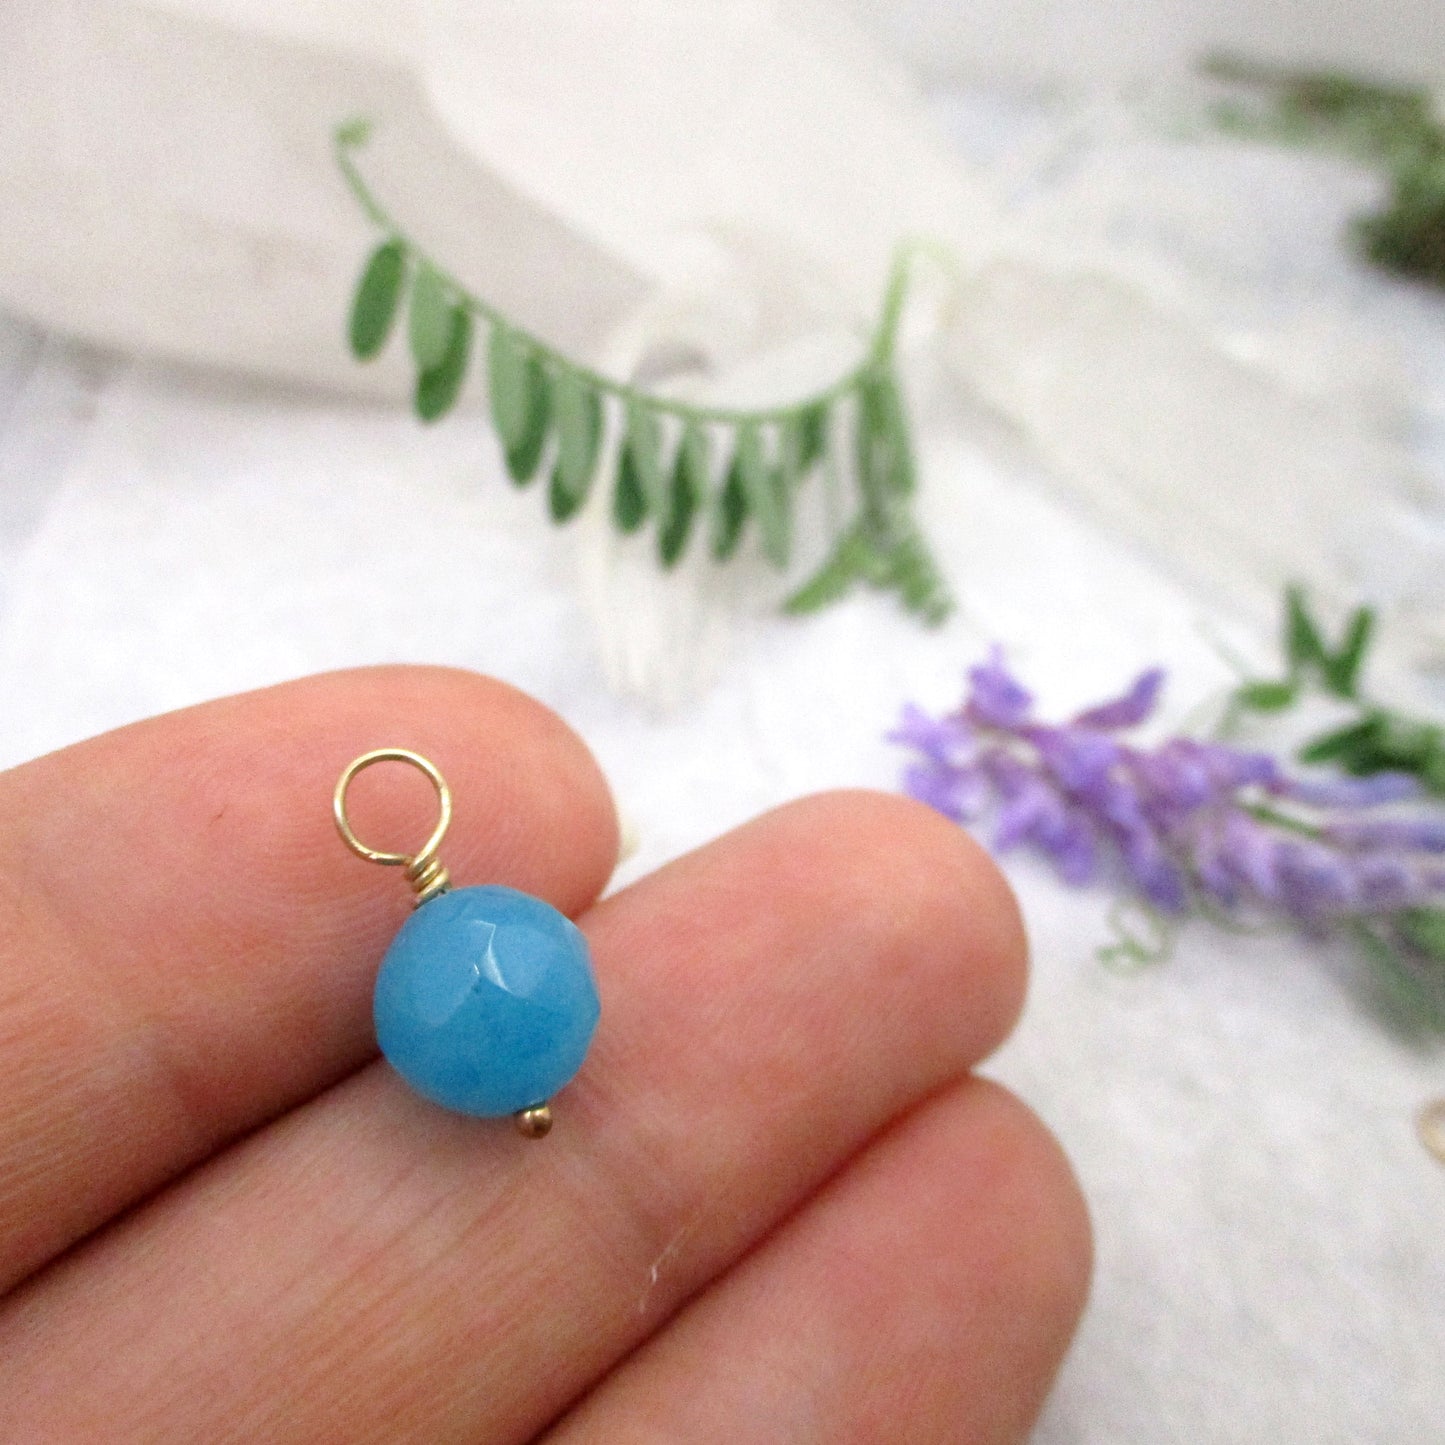 Caribbean Blue Turquoise Quartz Bead Wrap Charm in Solid Gold or Silver